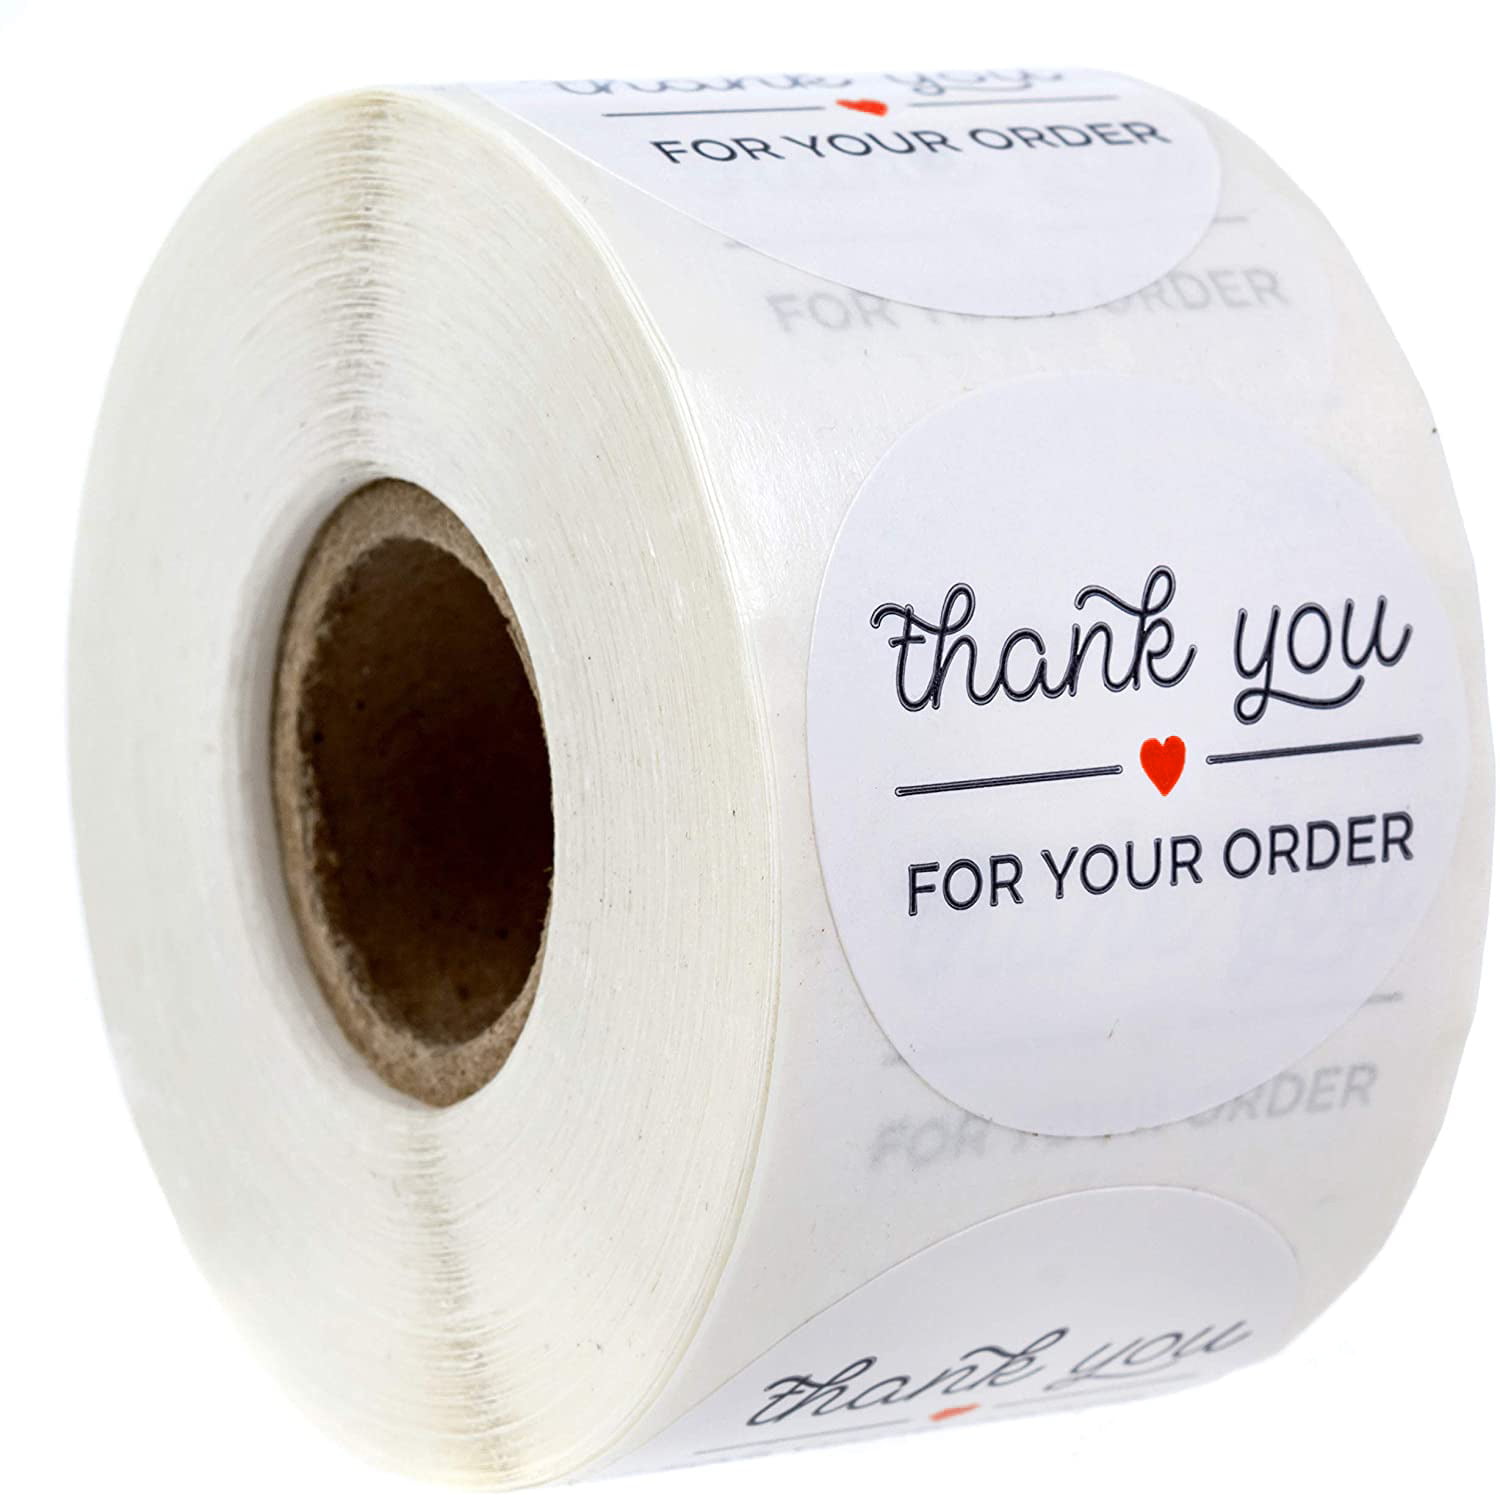 Sticker roll Sealing Craft Gift Paper Sticker Thank You Stickers Self Adhesive